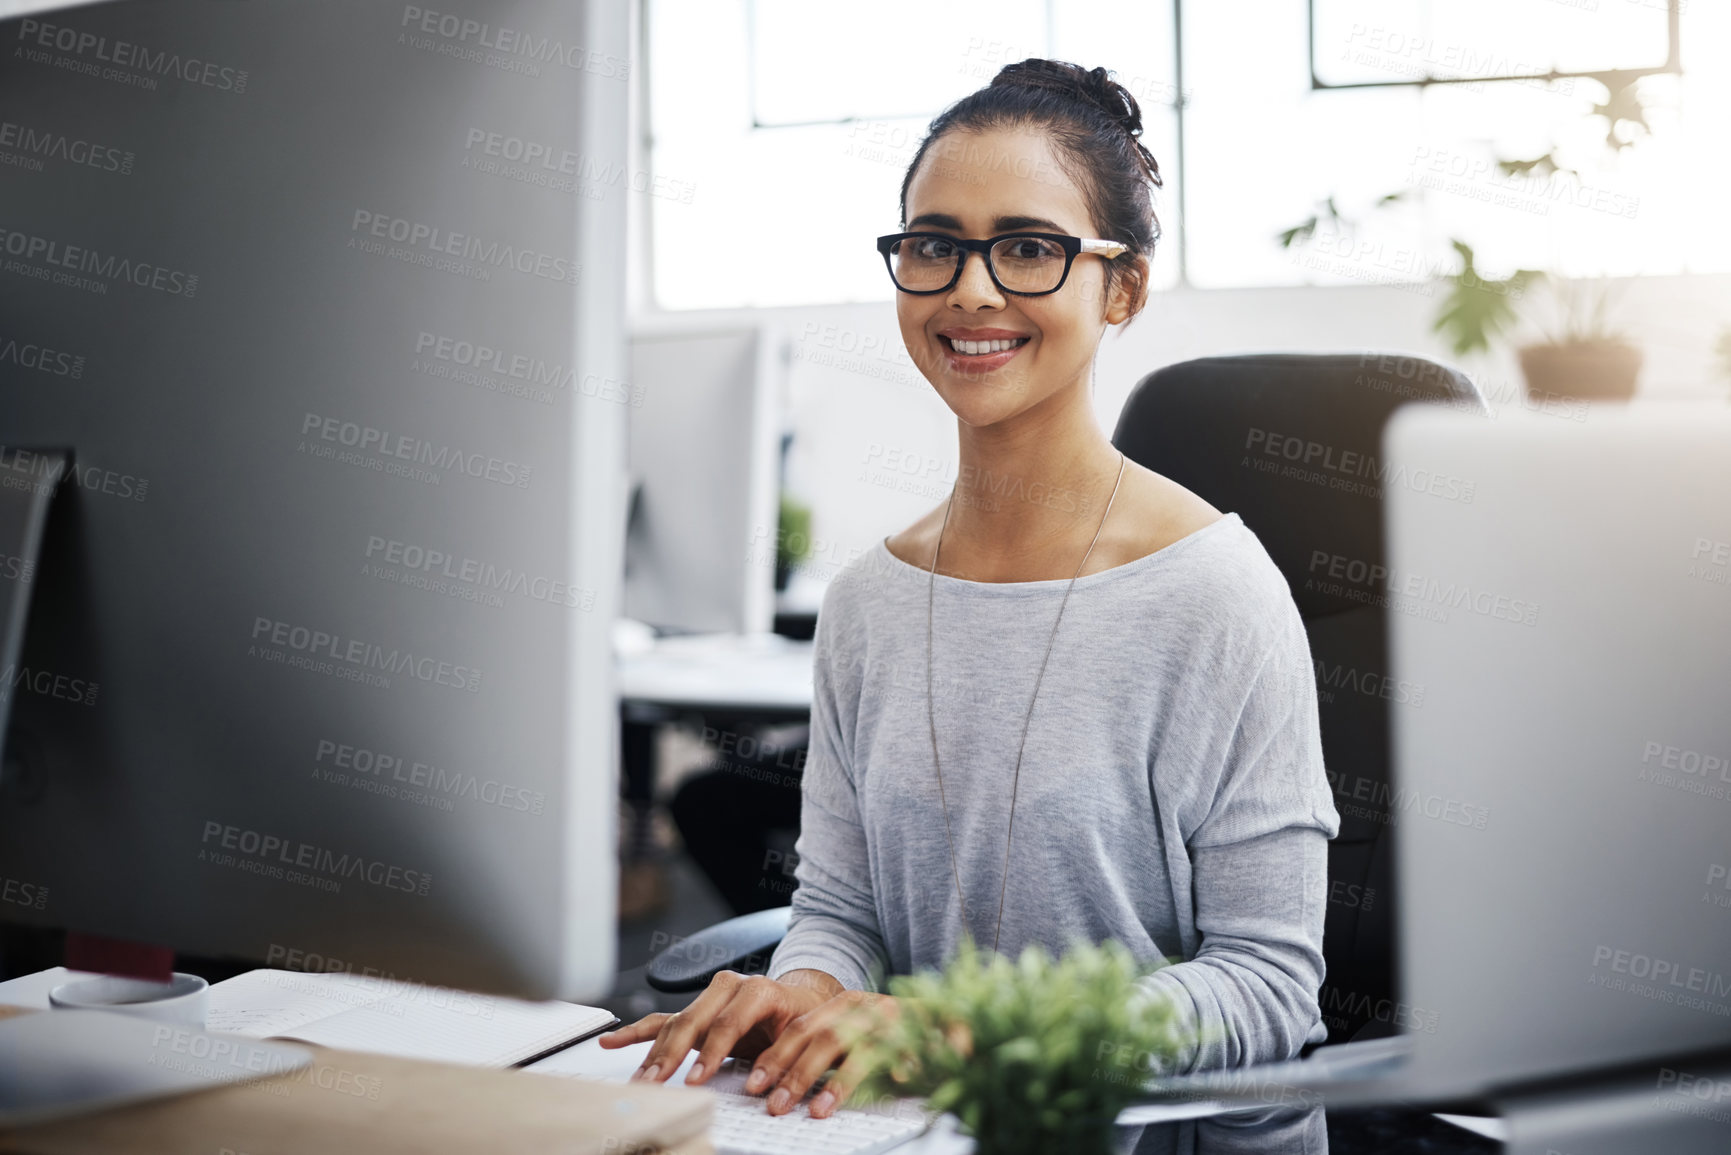 Buy stock photo Shot of a young businesswoman using a computer at her desk in a modern office